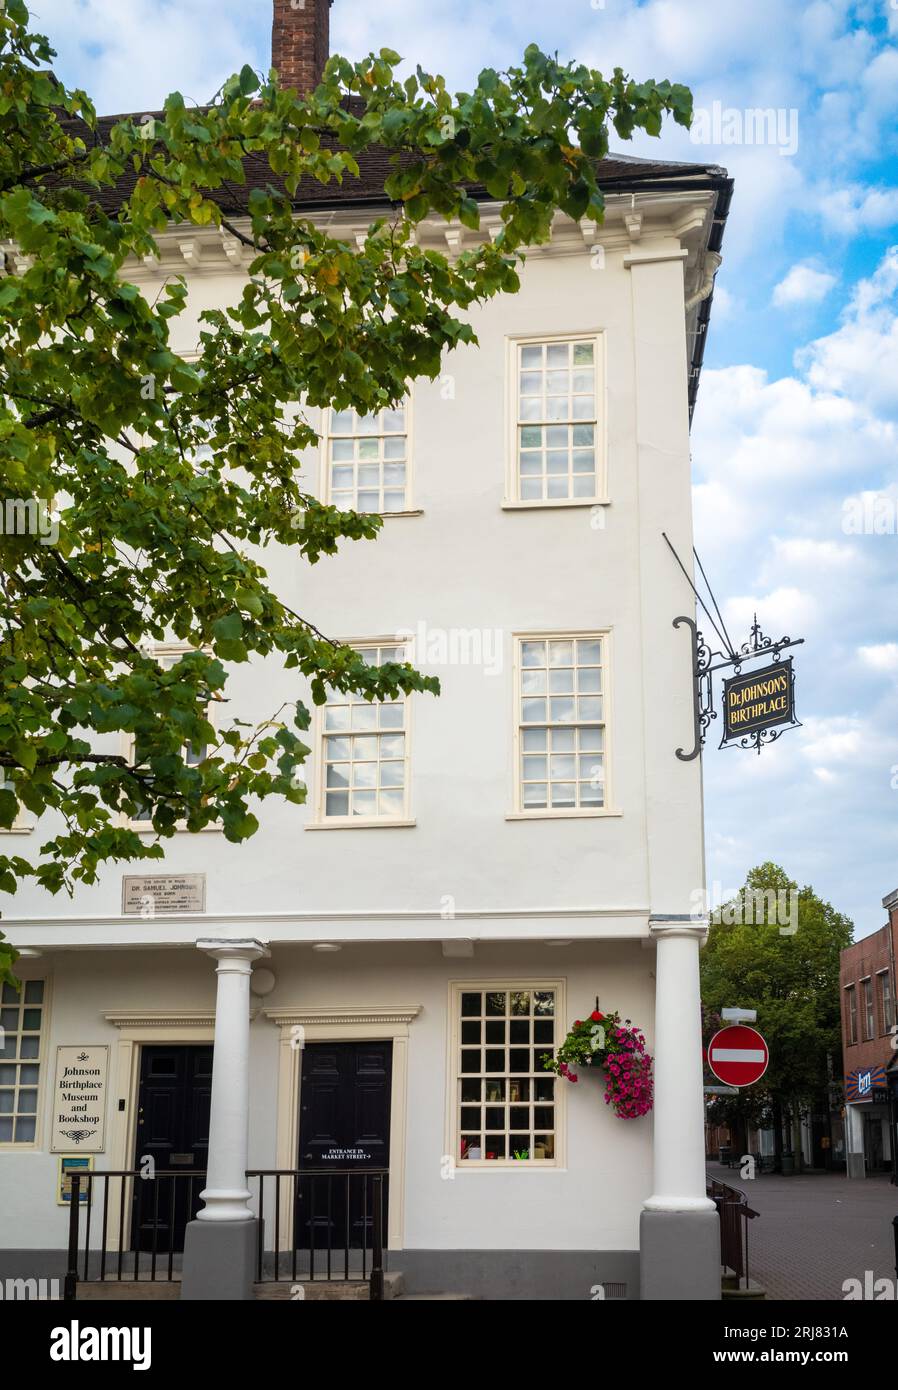 The house in Lichfield, Staffordshire, UK, where the famous writer, poet and playwright Samuel Johnson, or Dr Johnson, was born in 1709. Stock Photo